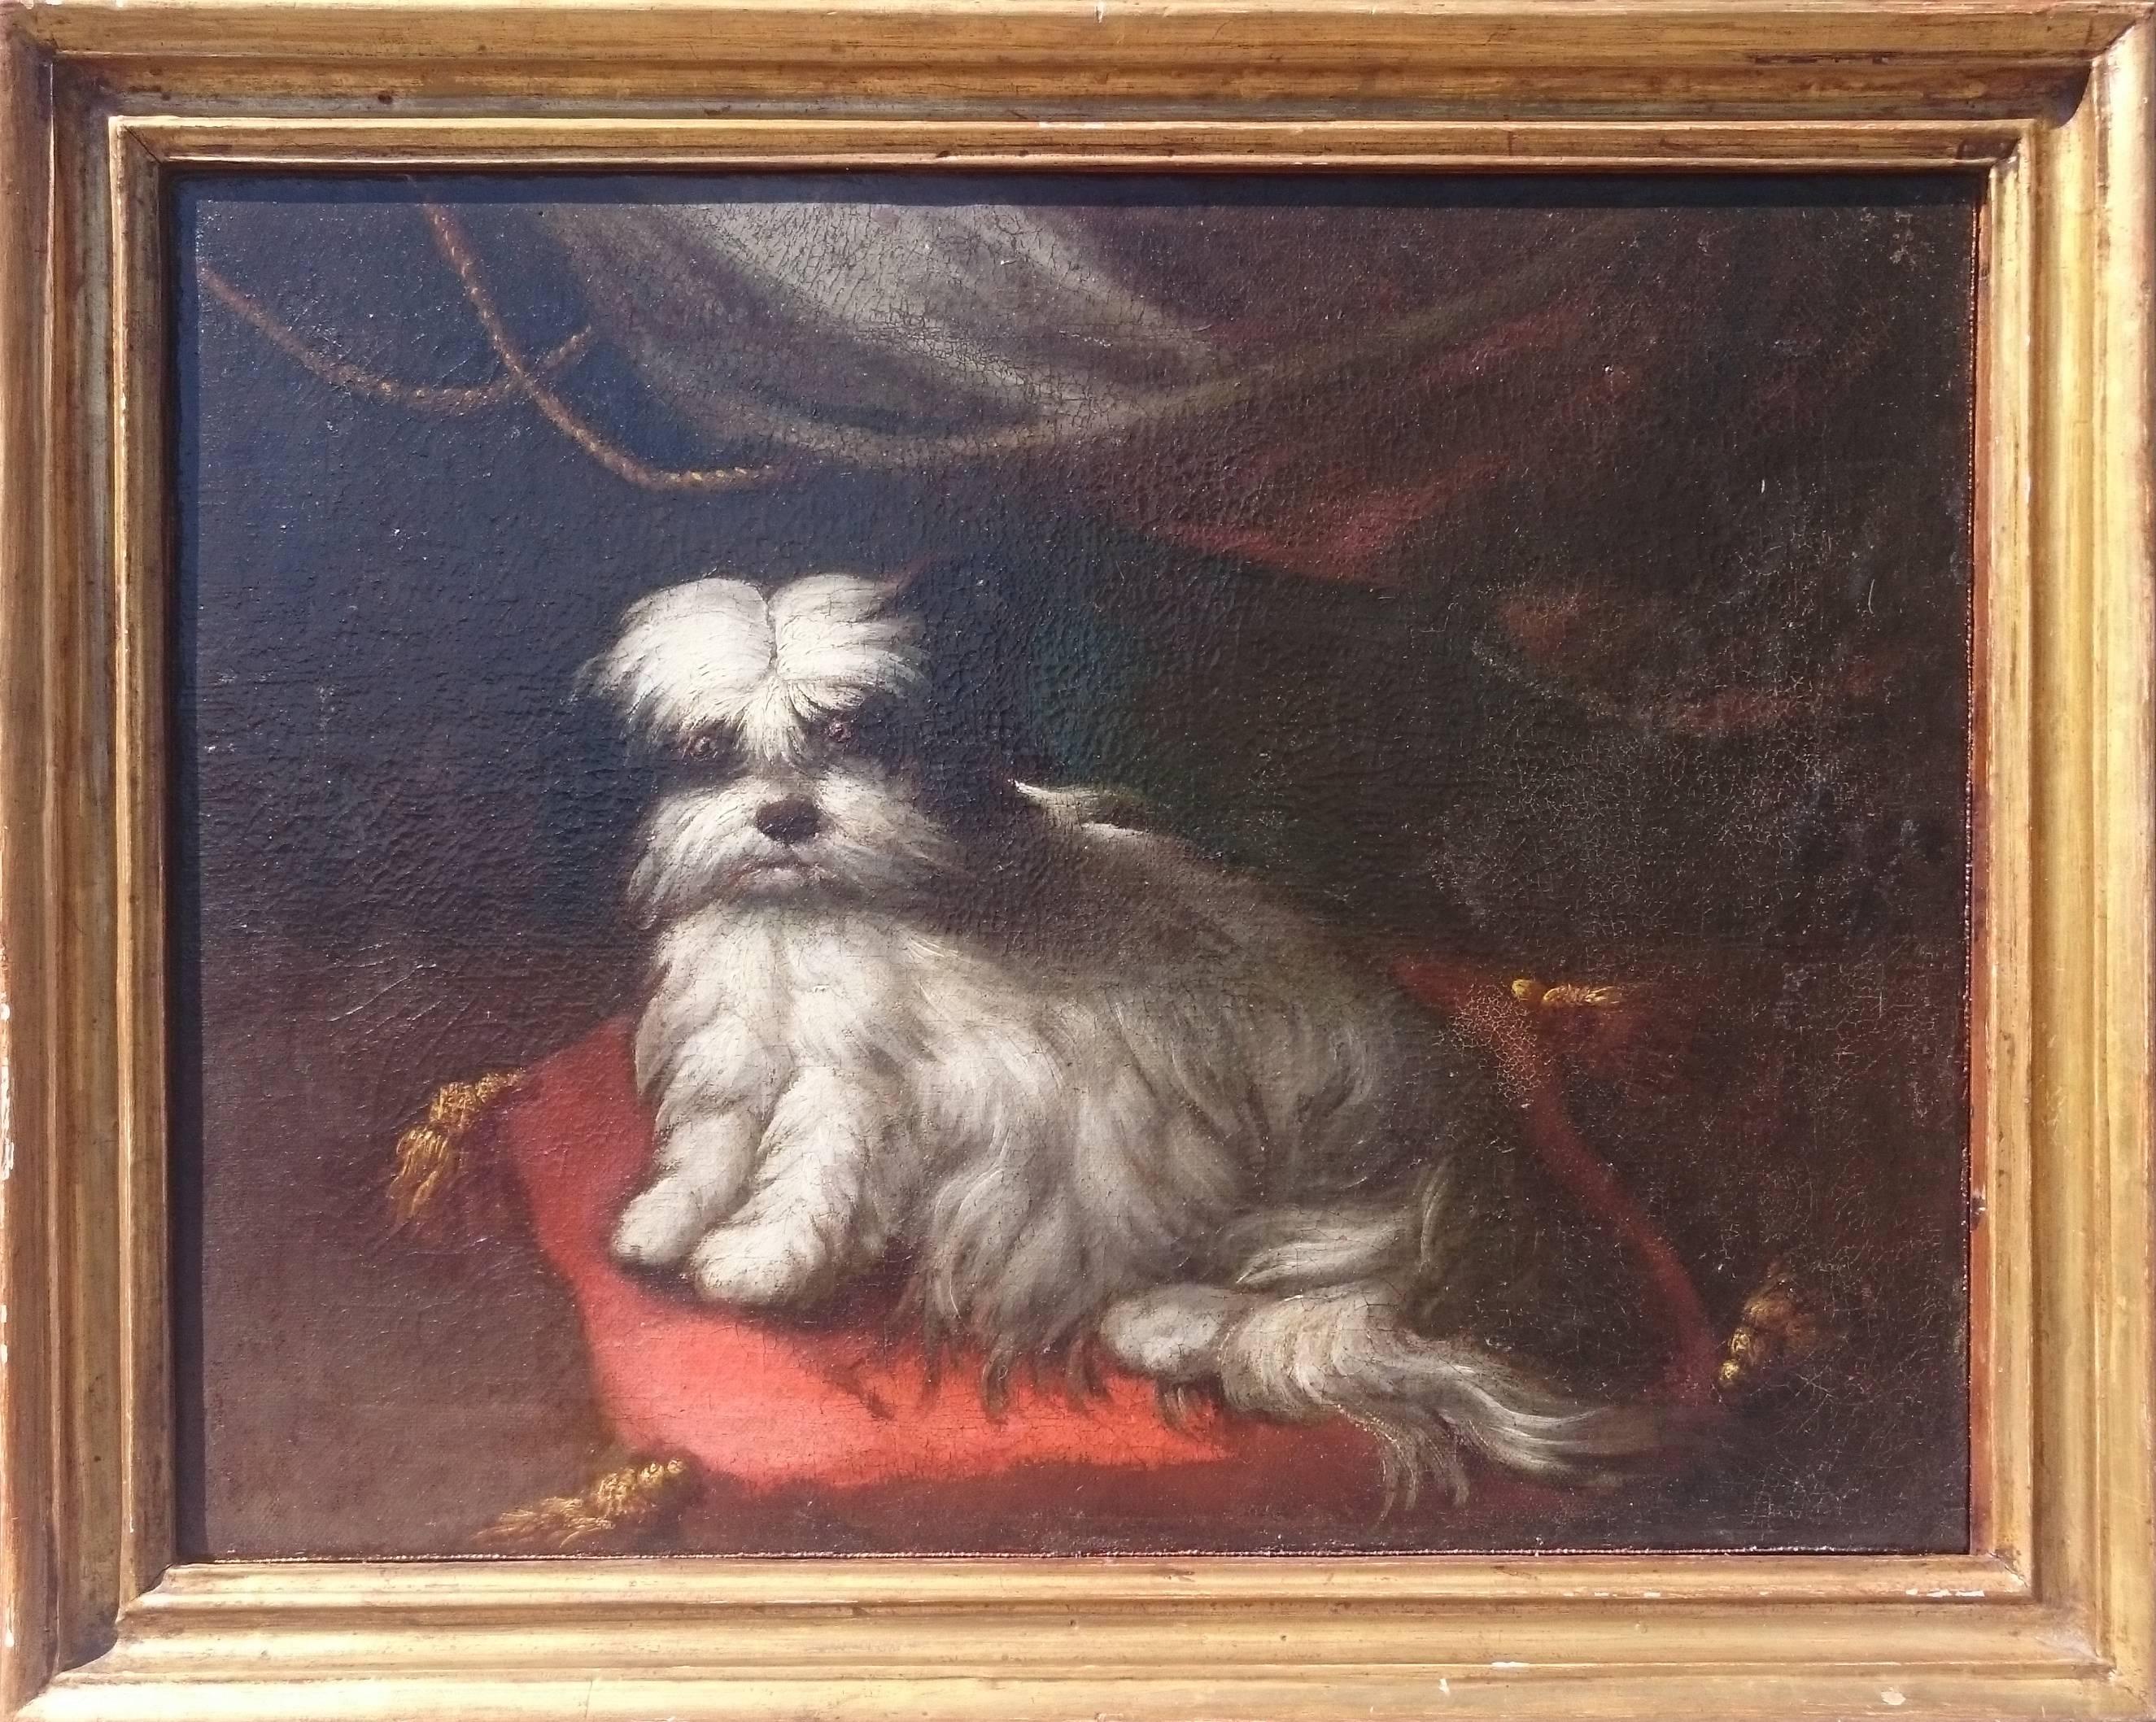 A charming 18th century Italian school painting of a dog on a red cushion, framed oil on canvas.

Measure: 21